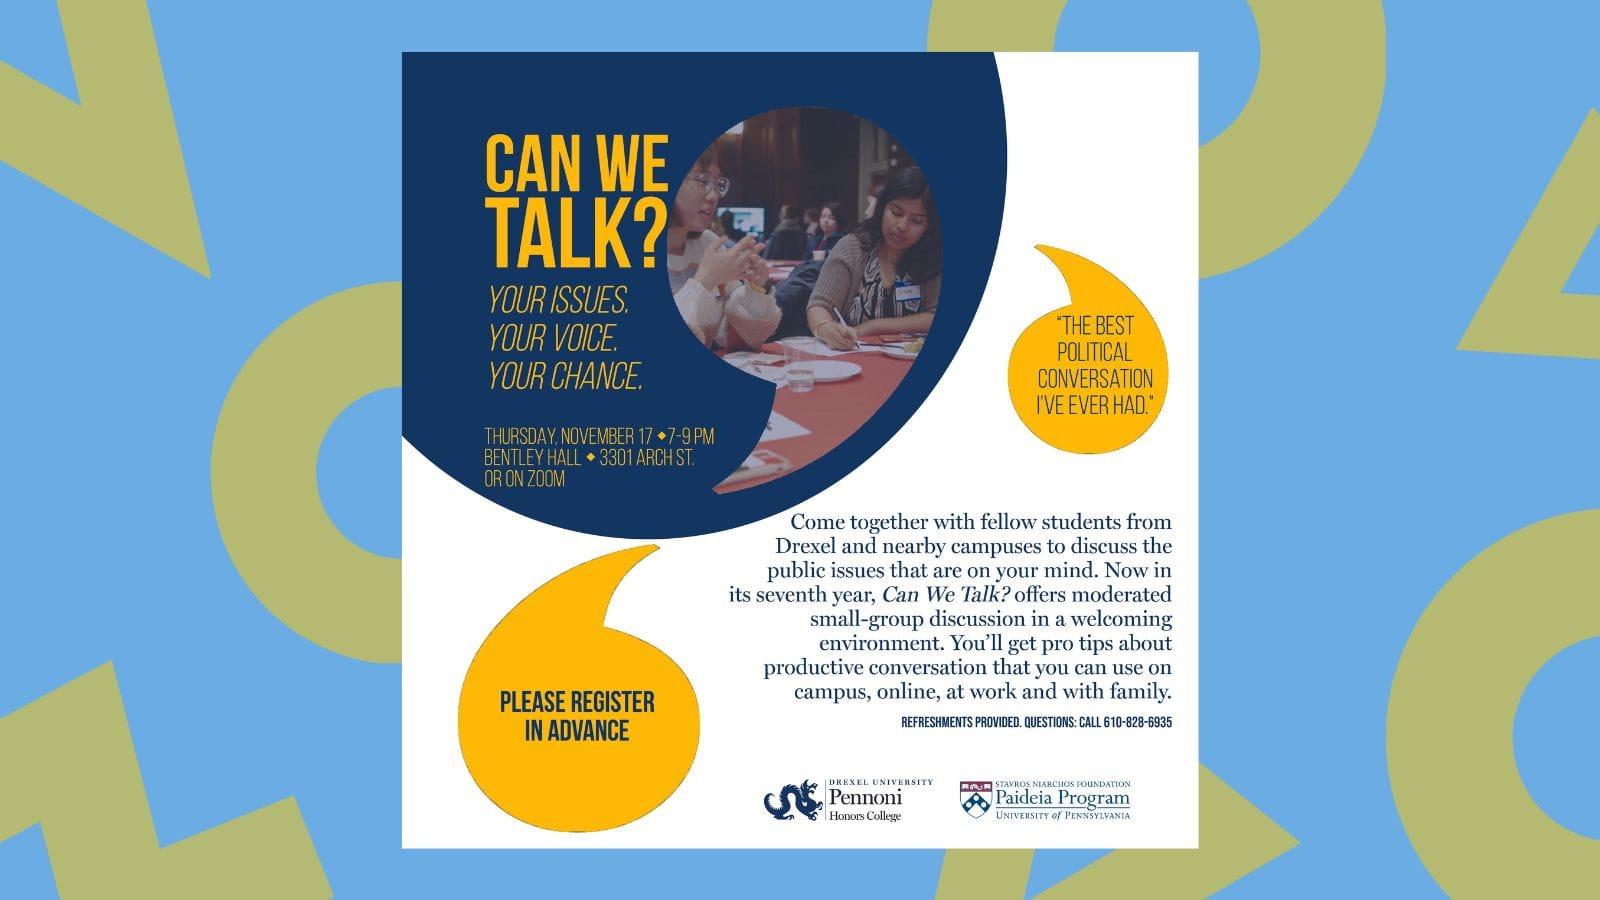 Poster for Can We Talk? event on Nov. 17 at Bentley Hall from 7-9 p.m.